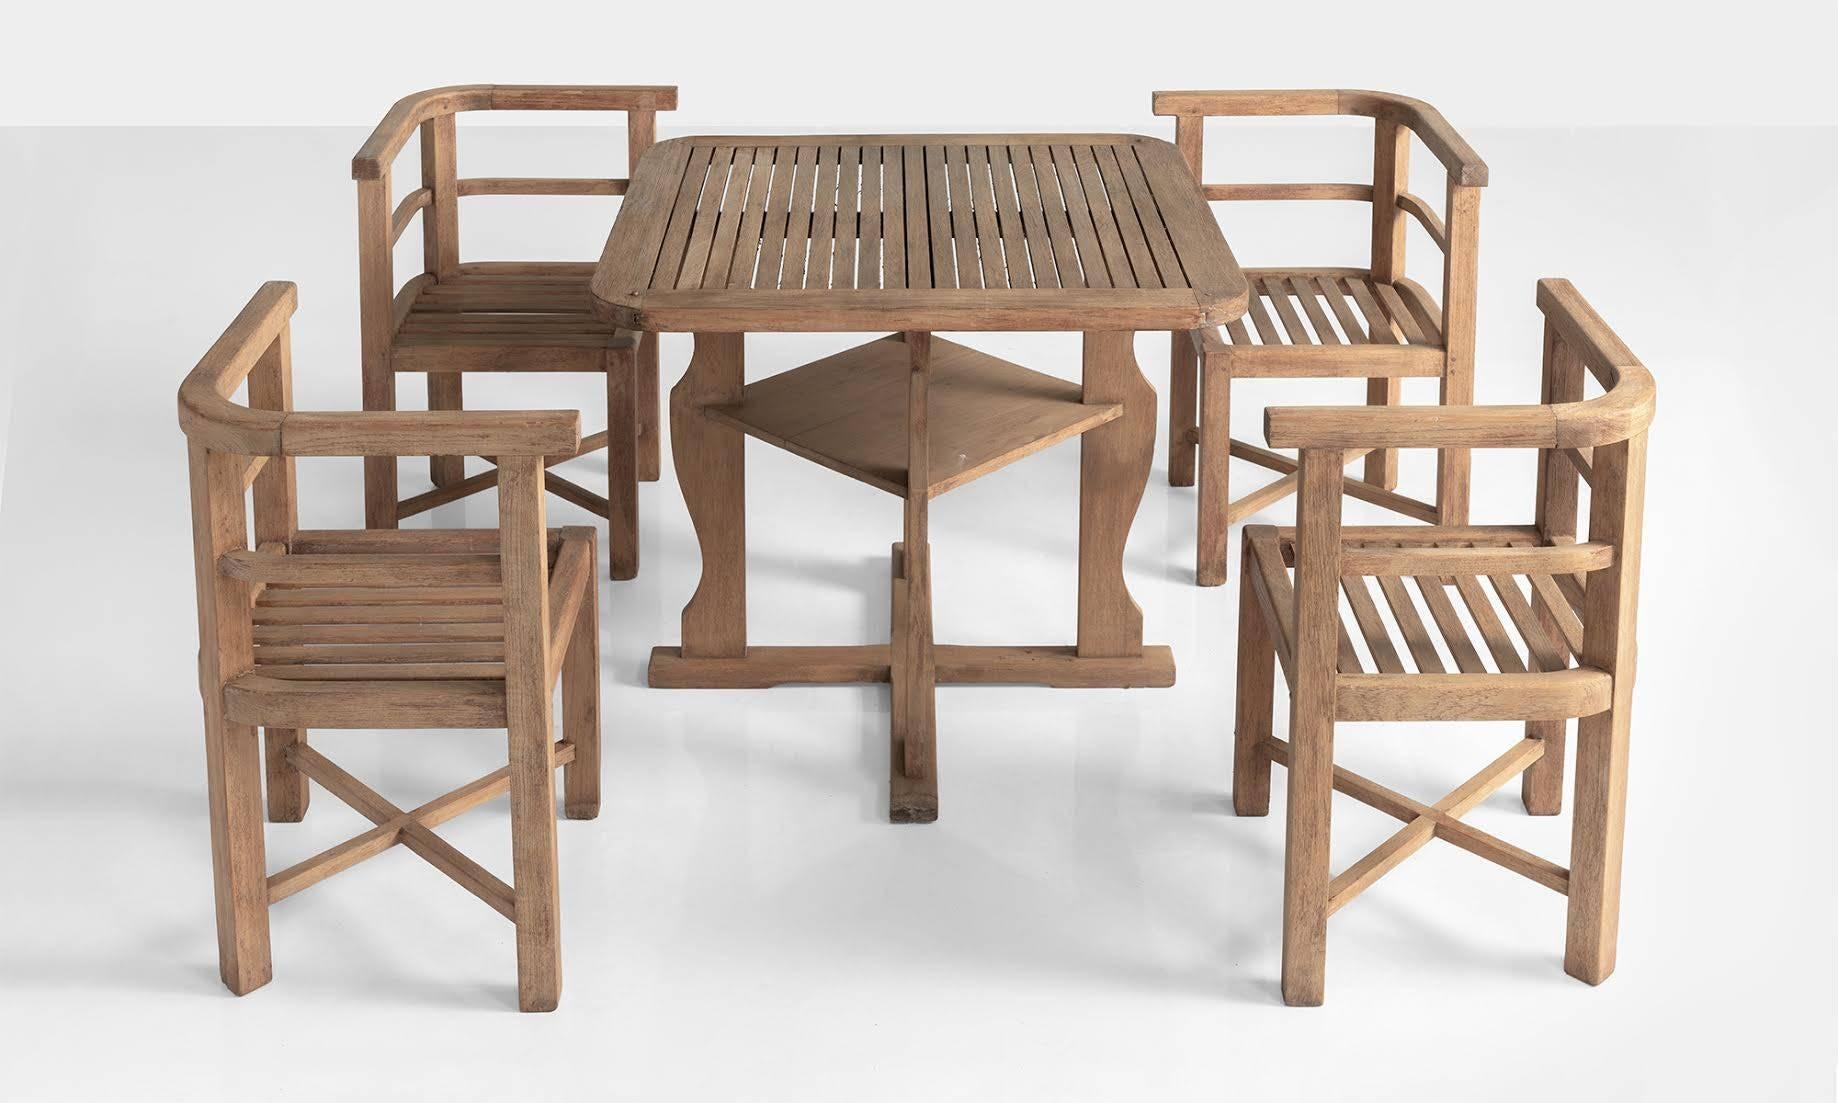 Heals teak garden set, England, circa 1930

Slatted teak table with chairs, made by Hughes Bolcklow for Heals of London.

Measures: Table: 33